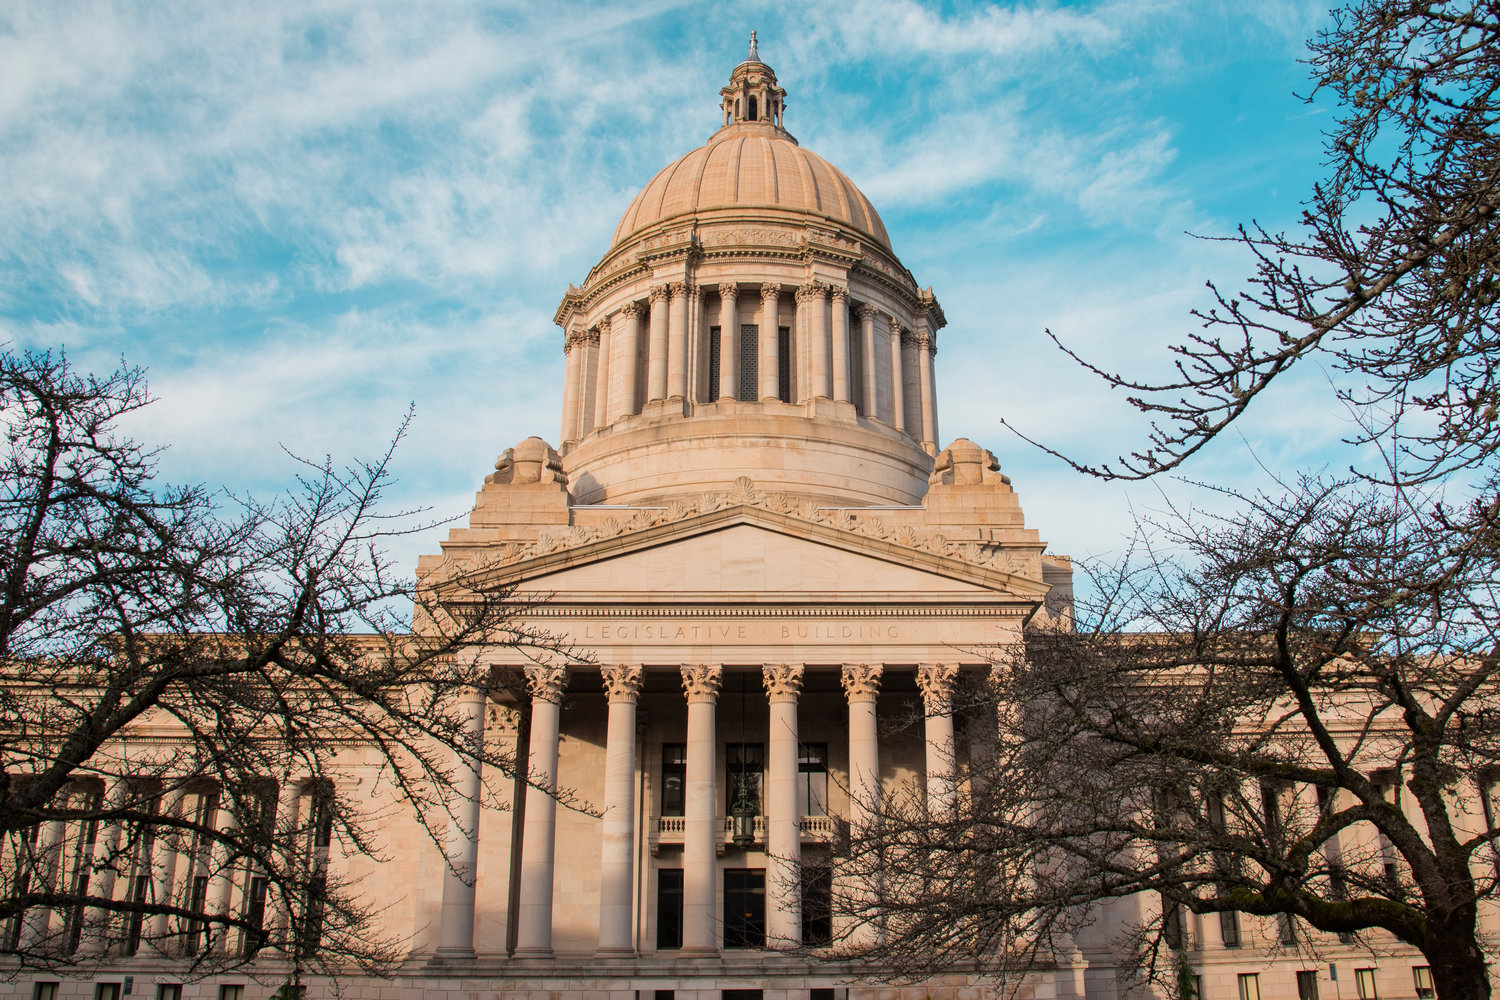 The Washington state Capitol building is pictured in Olympia in this file photo.